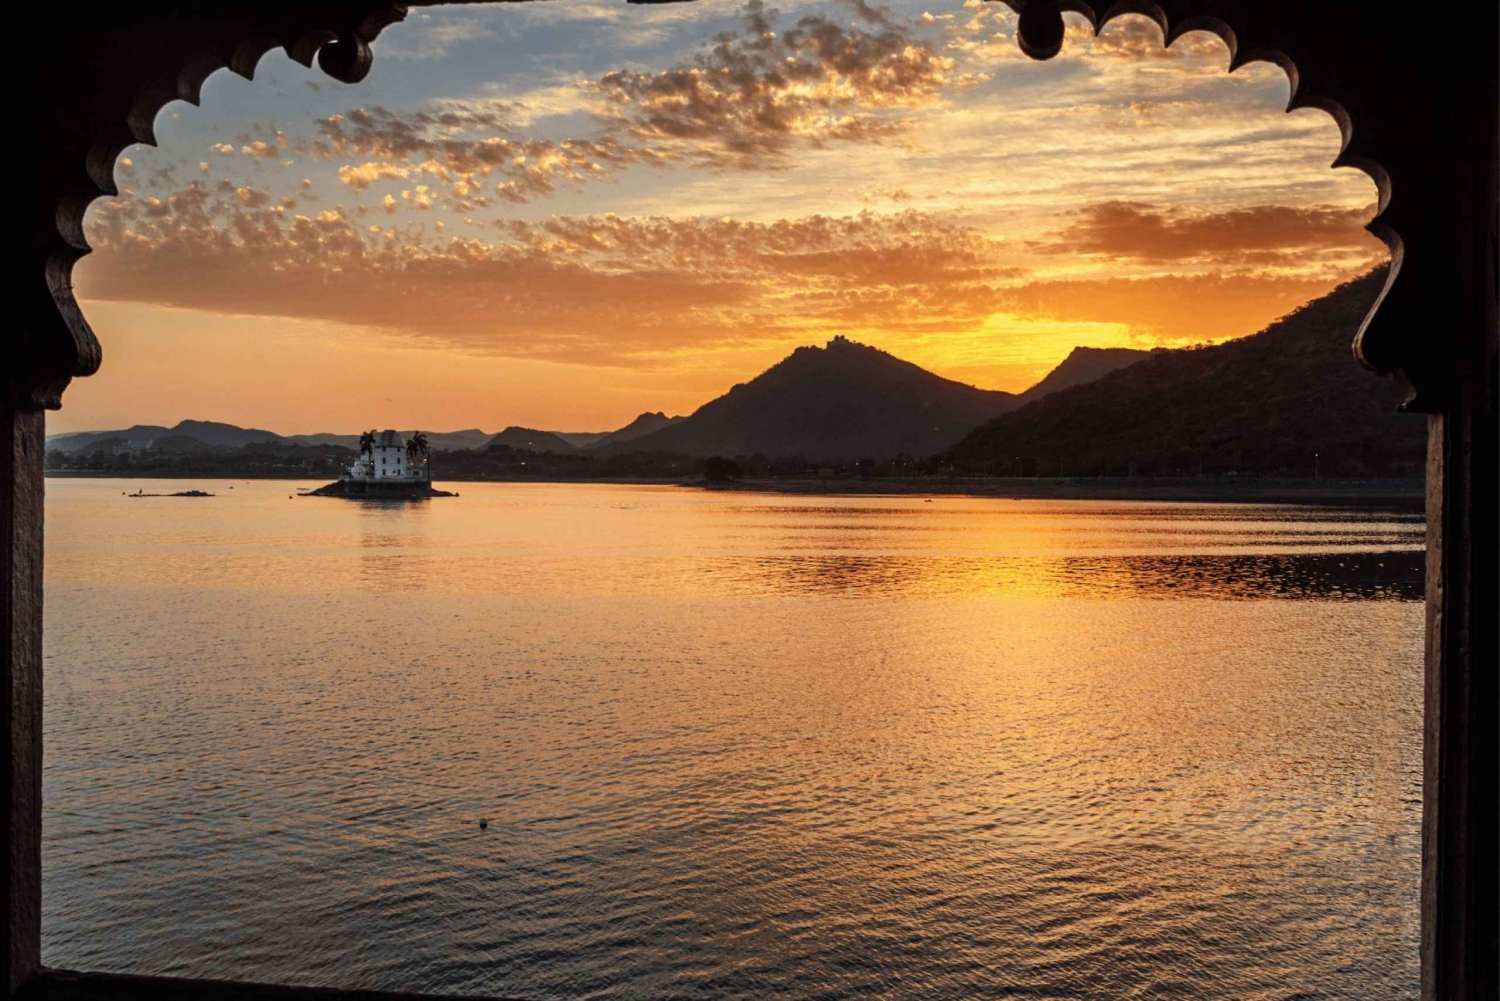 Guided Night Walking Tour in Udaipur- Guided Walking Tour